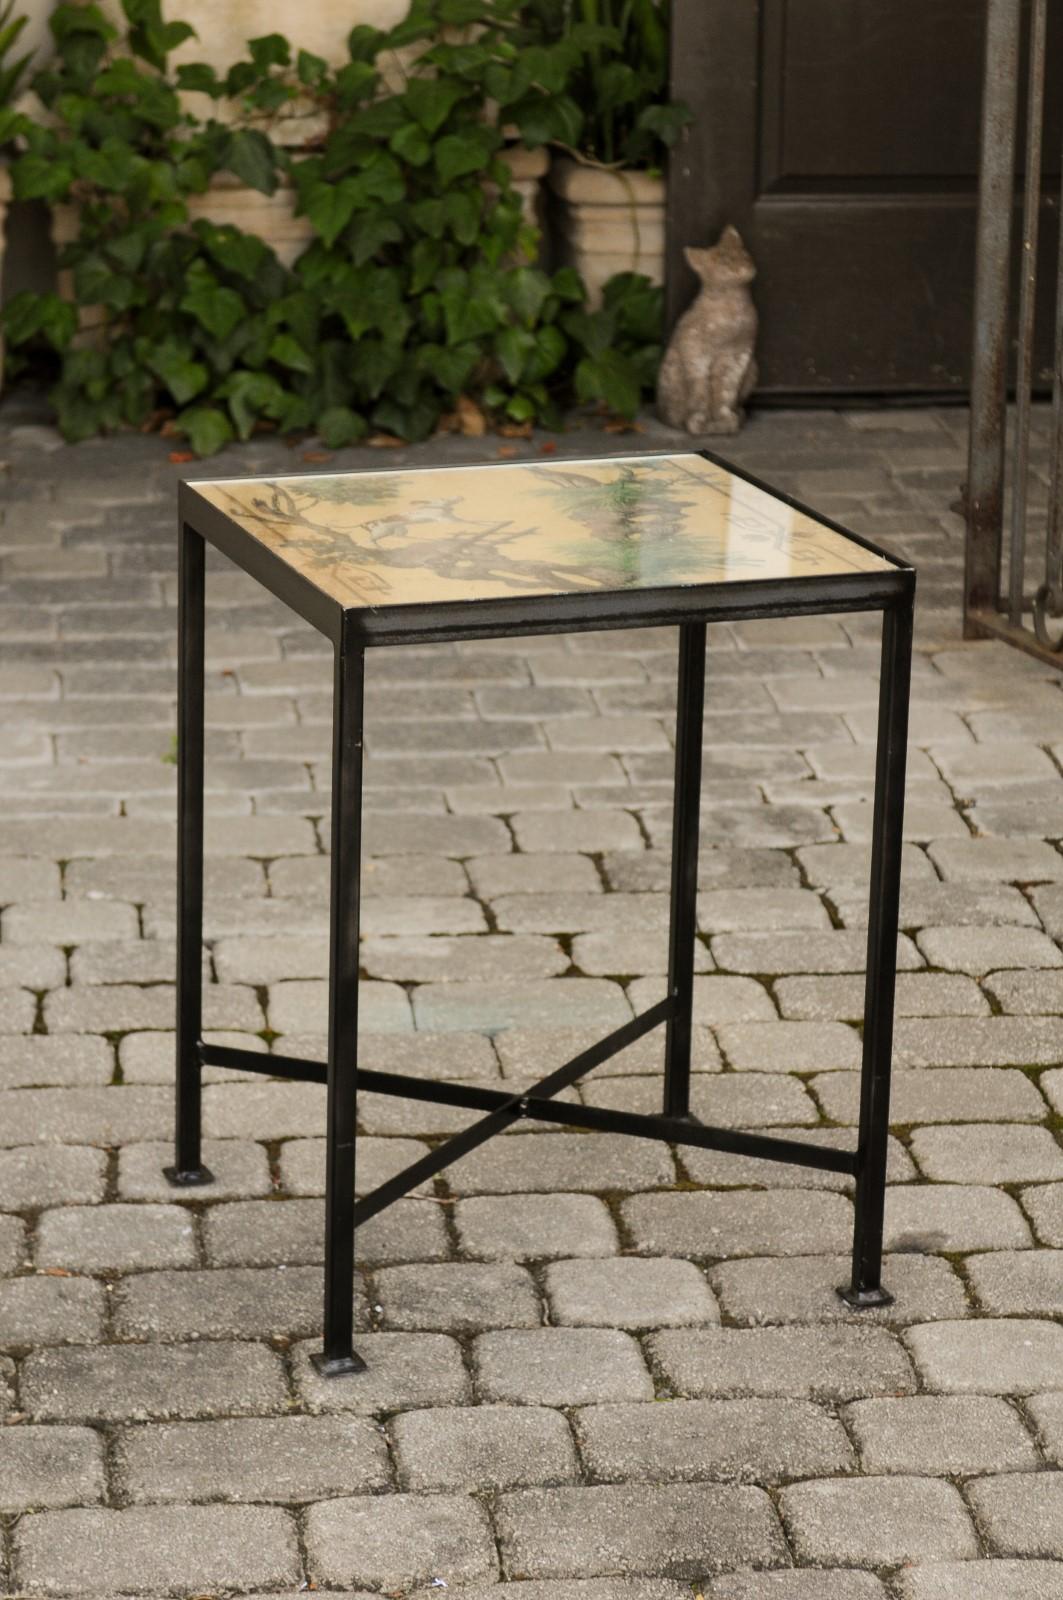 Glass Chinoiserie Contemporary Side Table with Dog and Rabbit Motifs and Iron Base